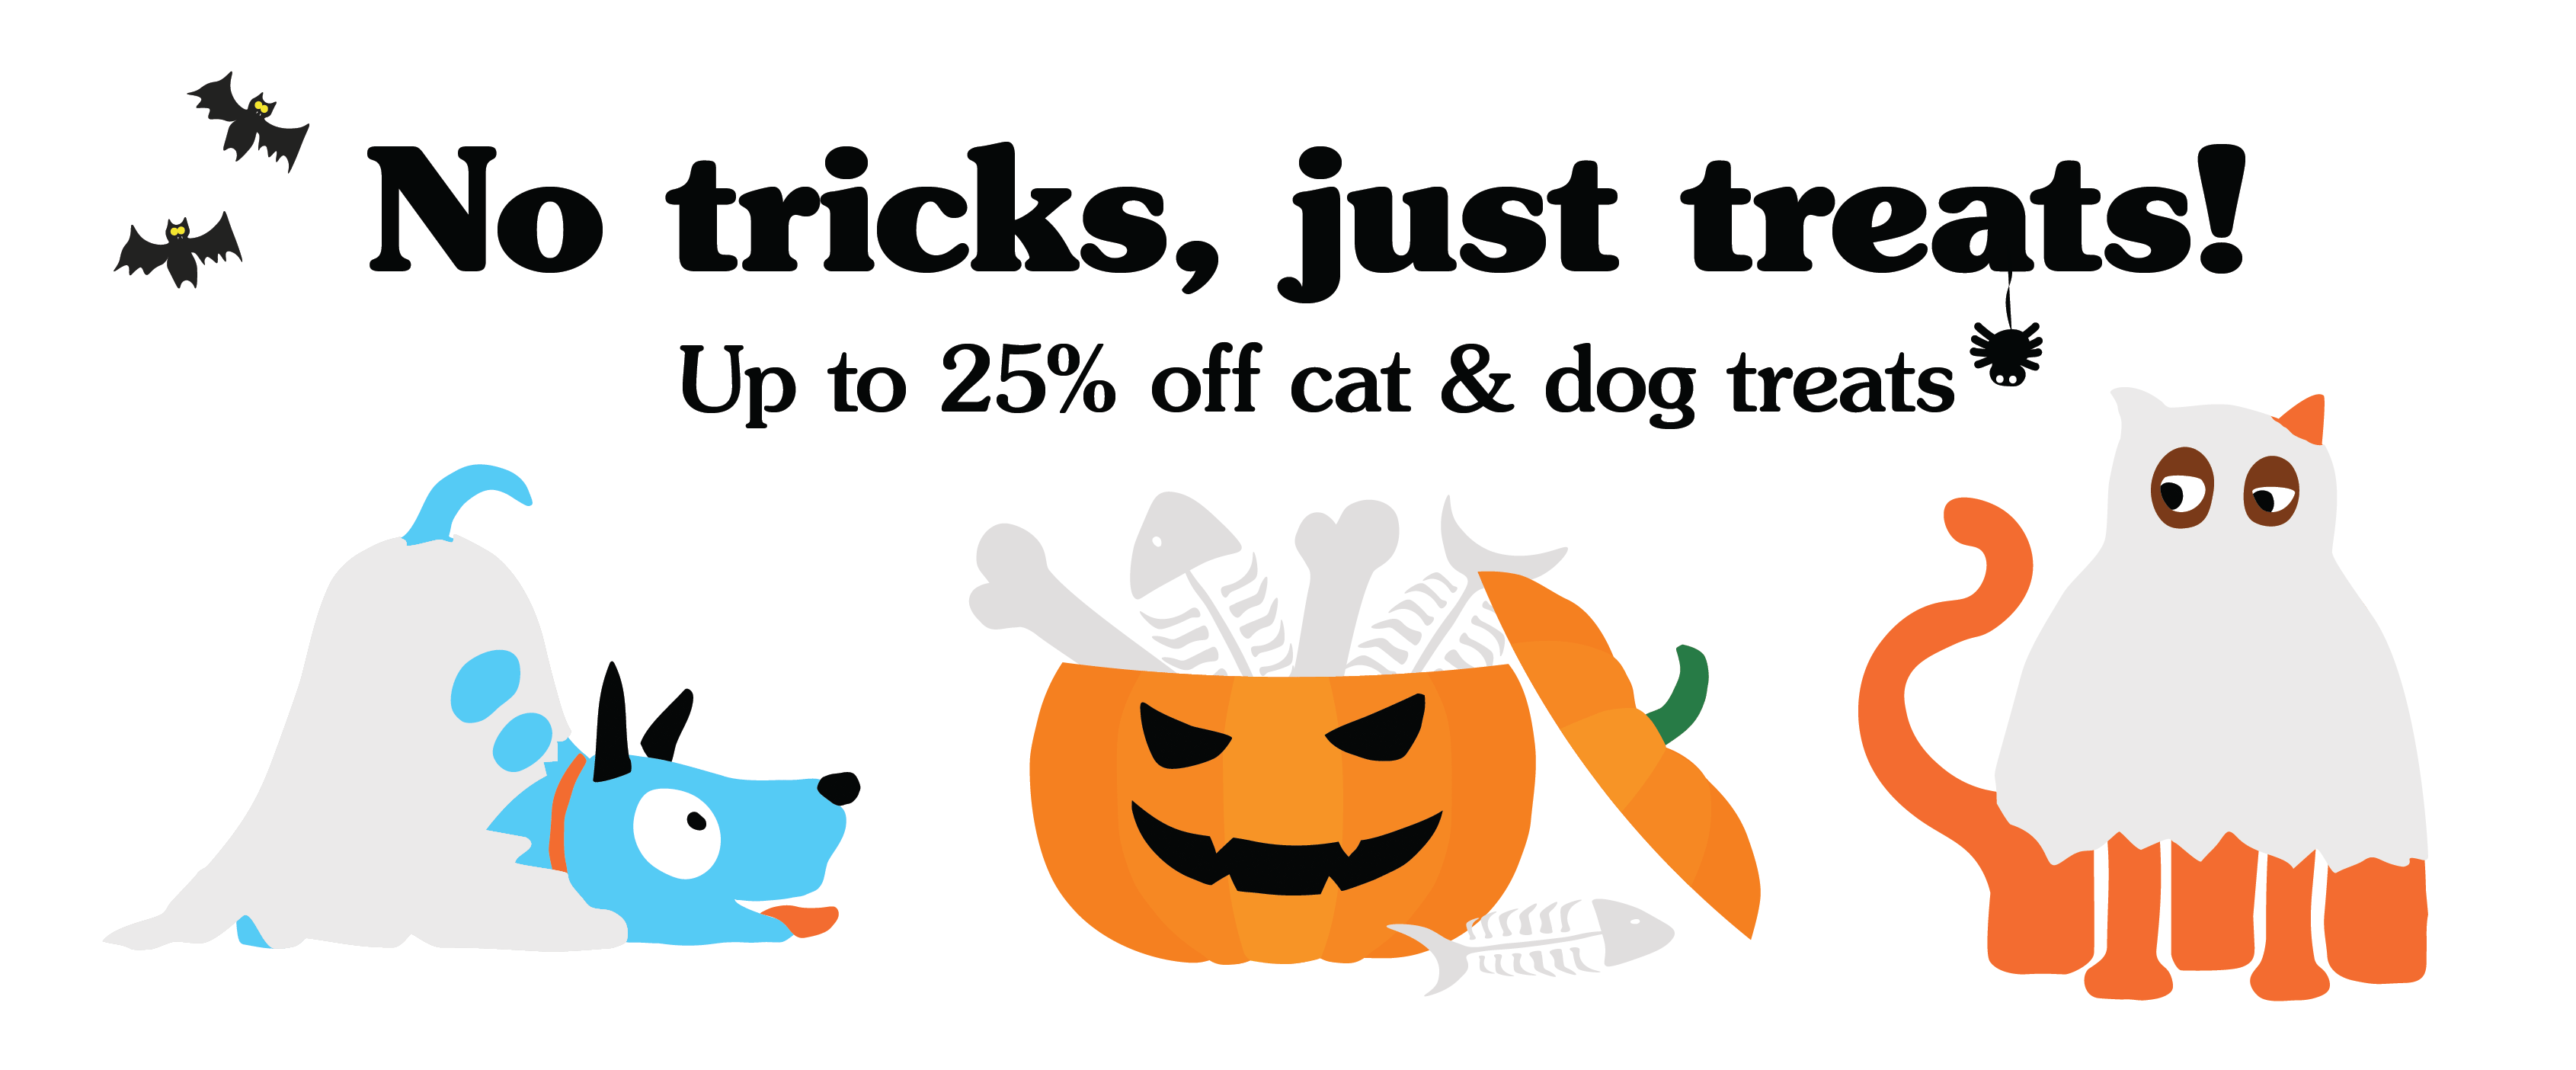 Up to 25% off treats